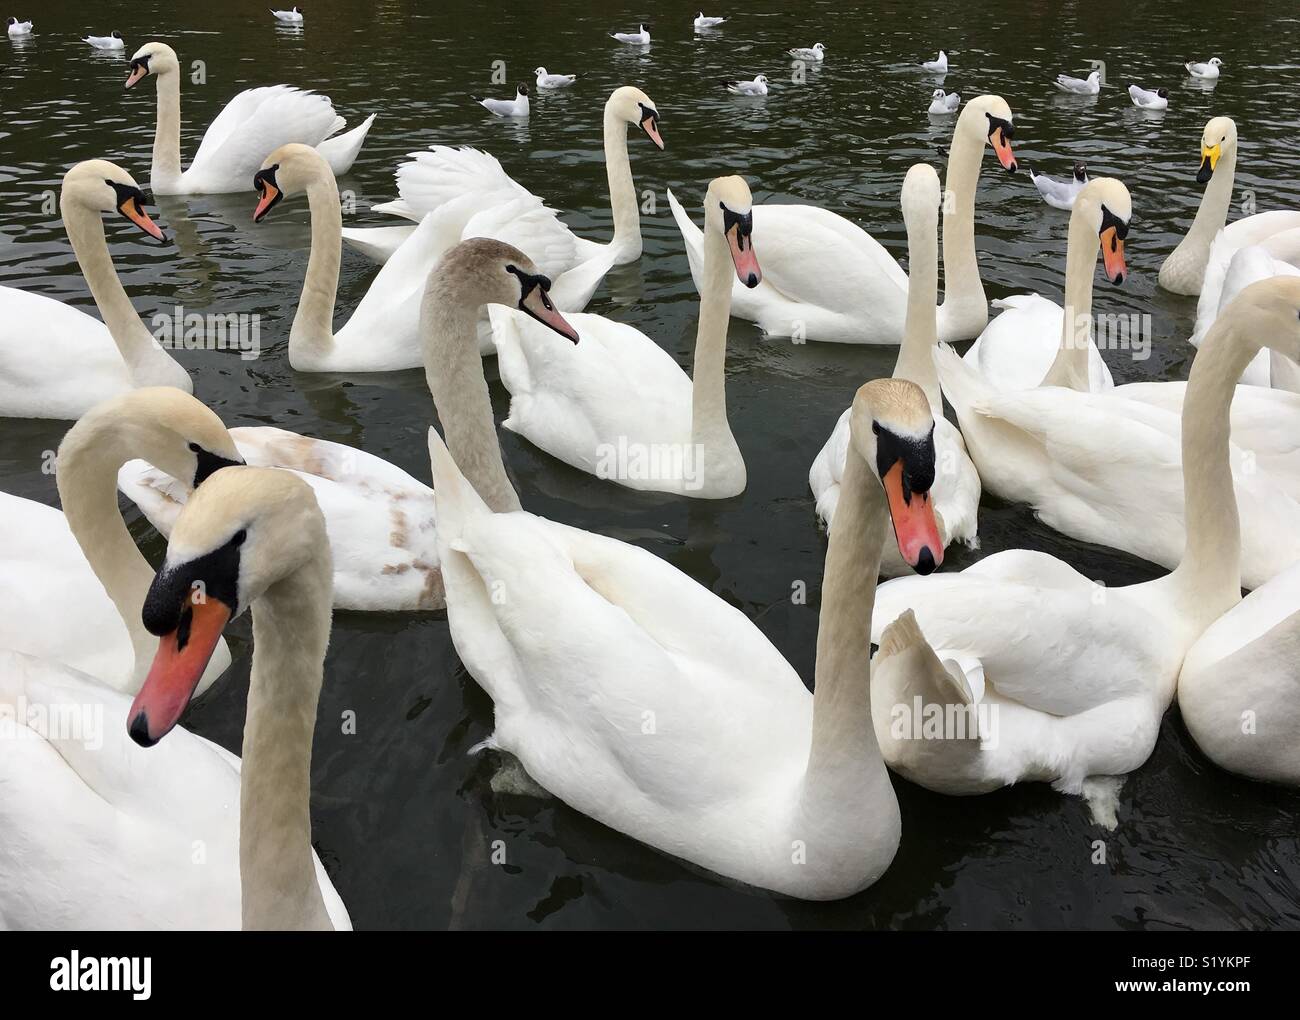 Swans on a lake Stock Photo